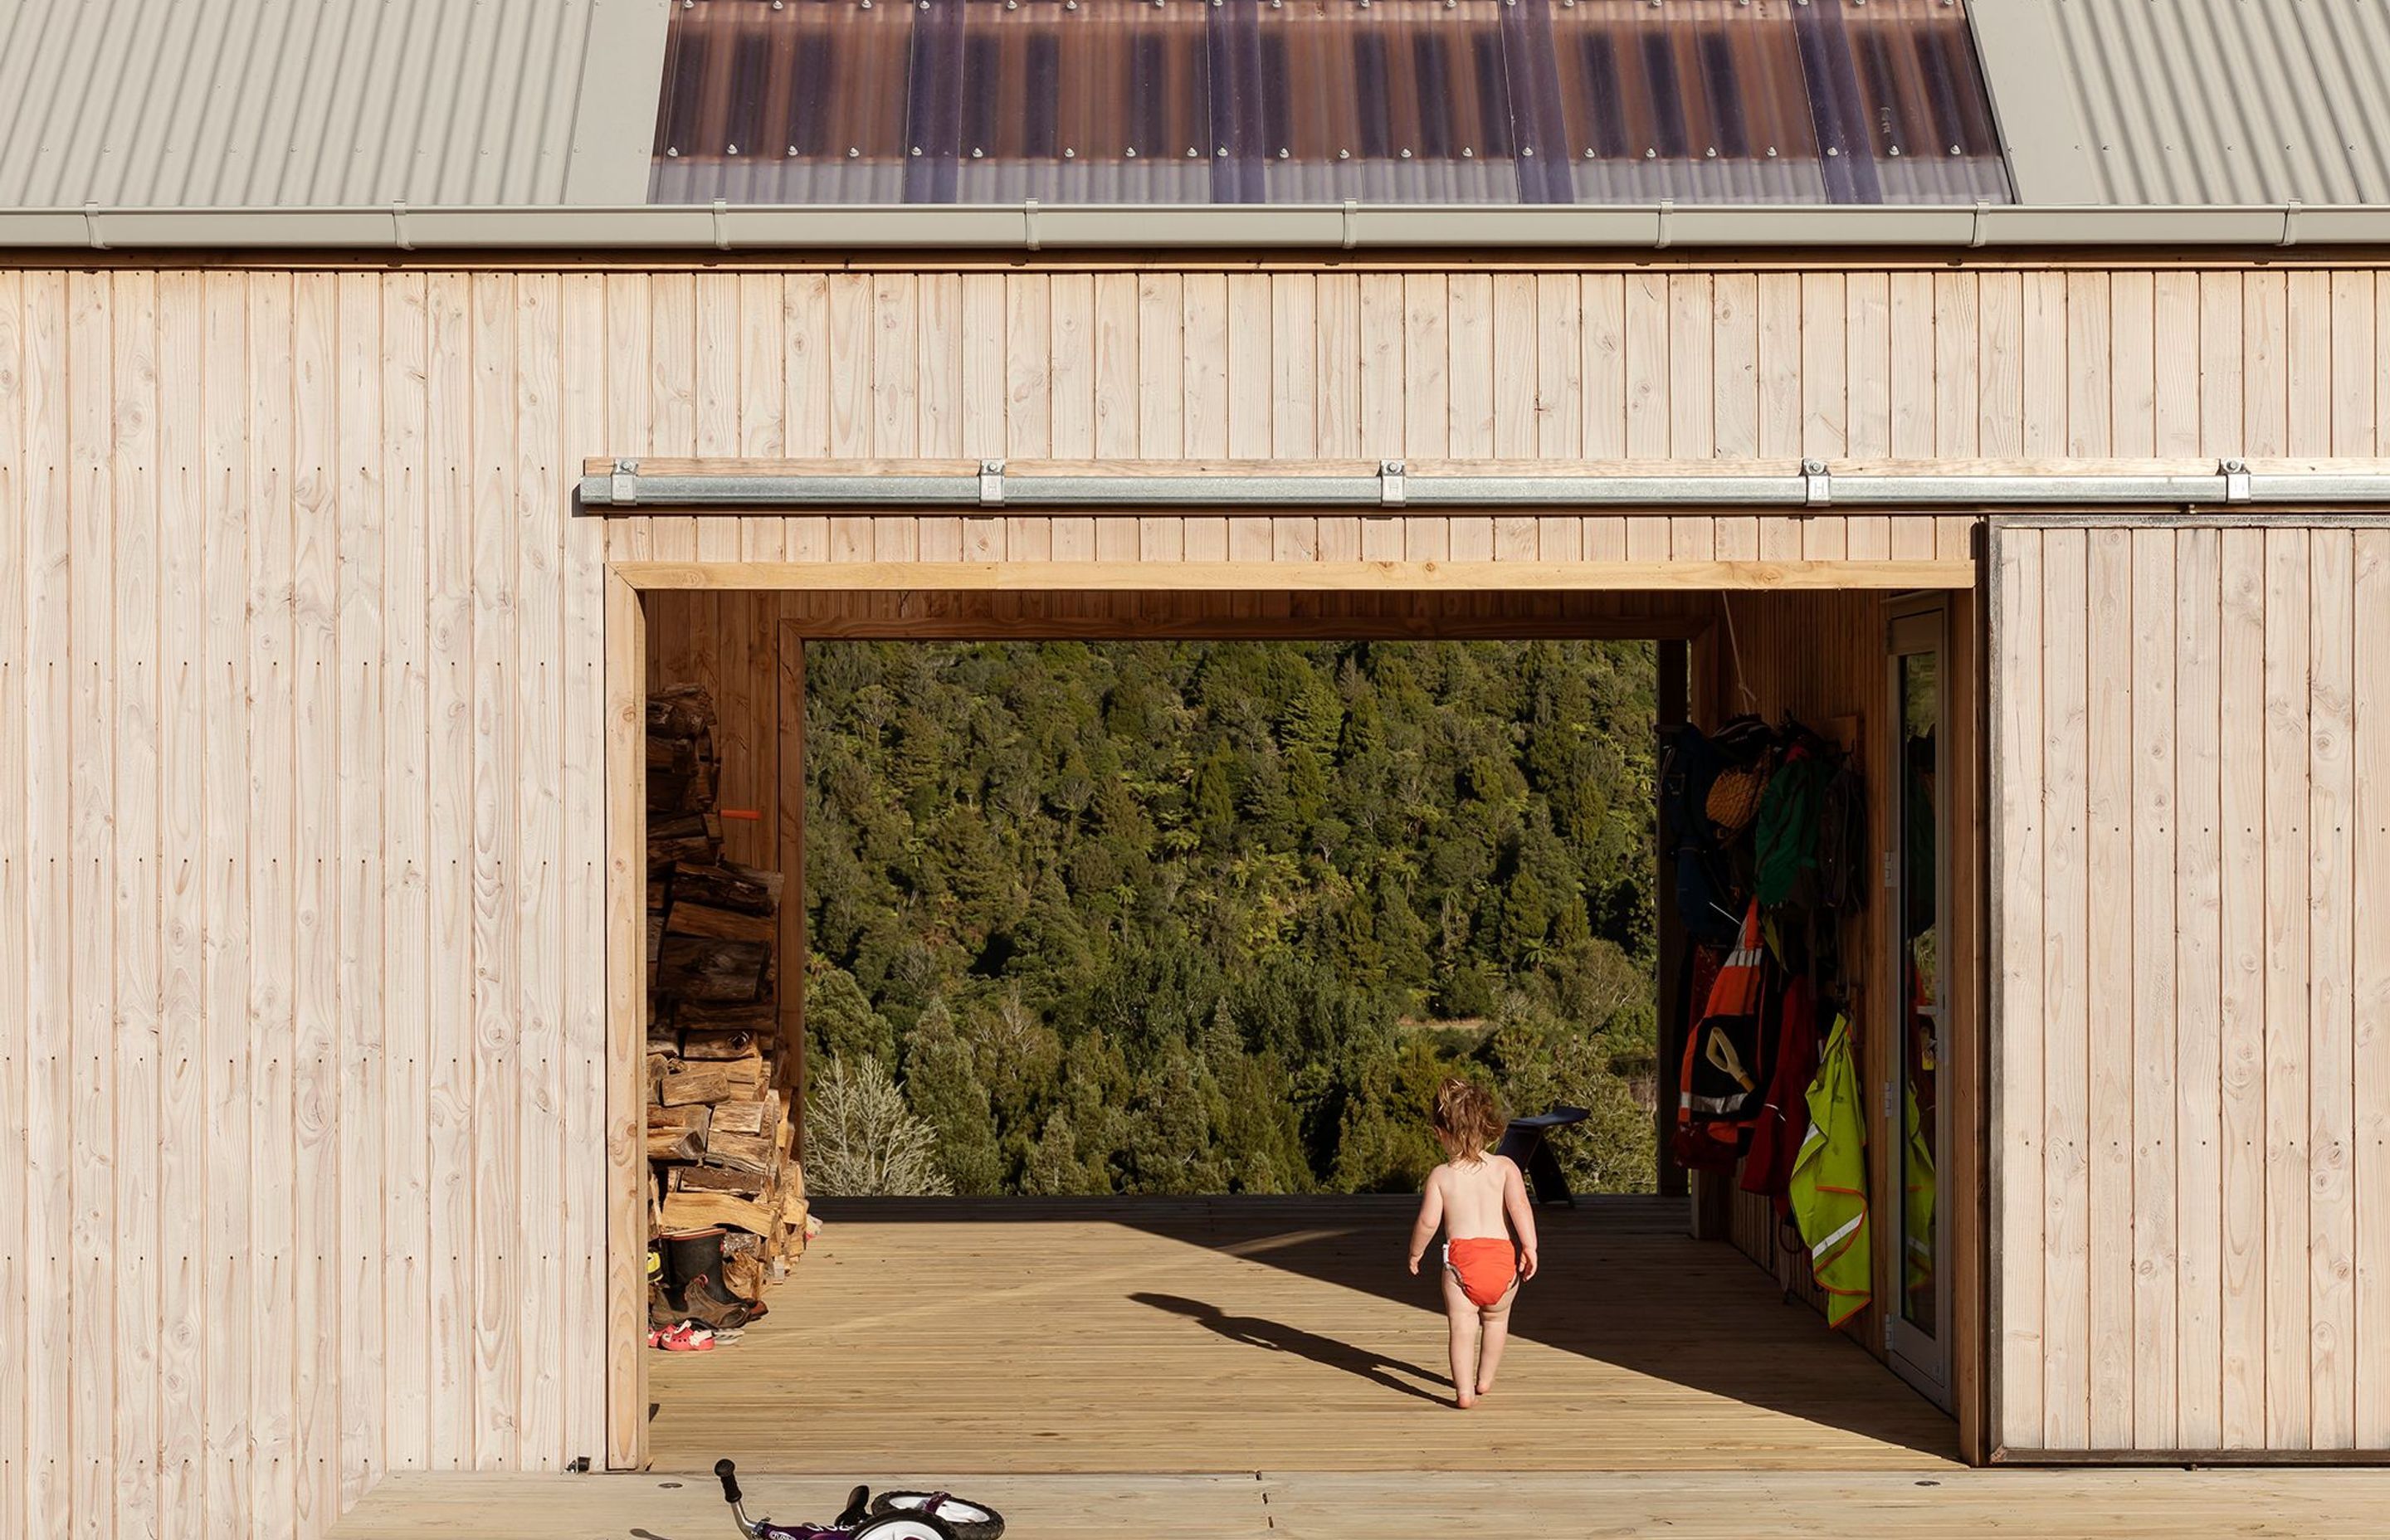 The remote rural location overlooking native forest is the perfect environment for a naked two year old to freely run around.